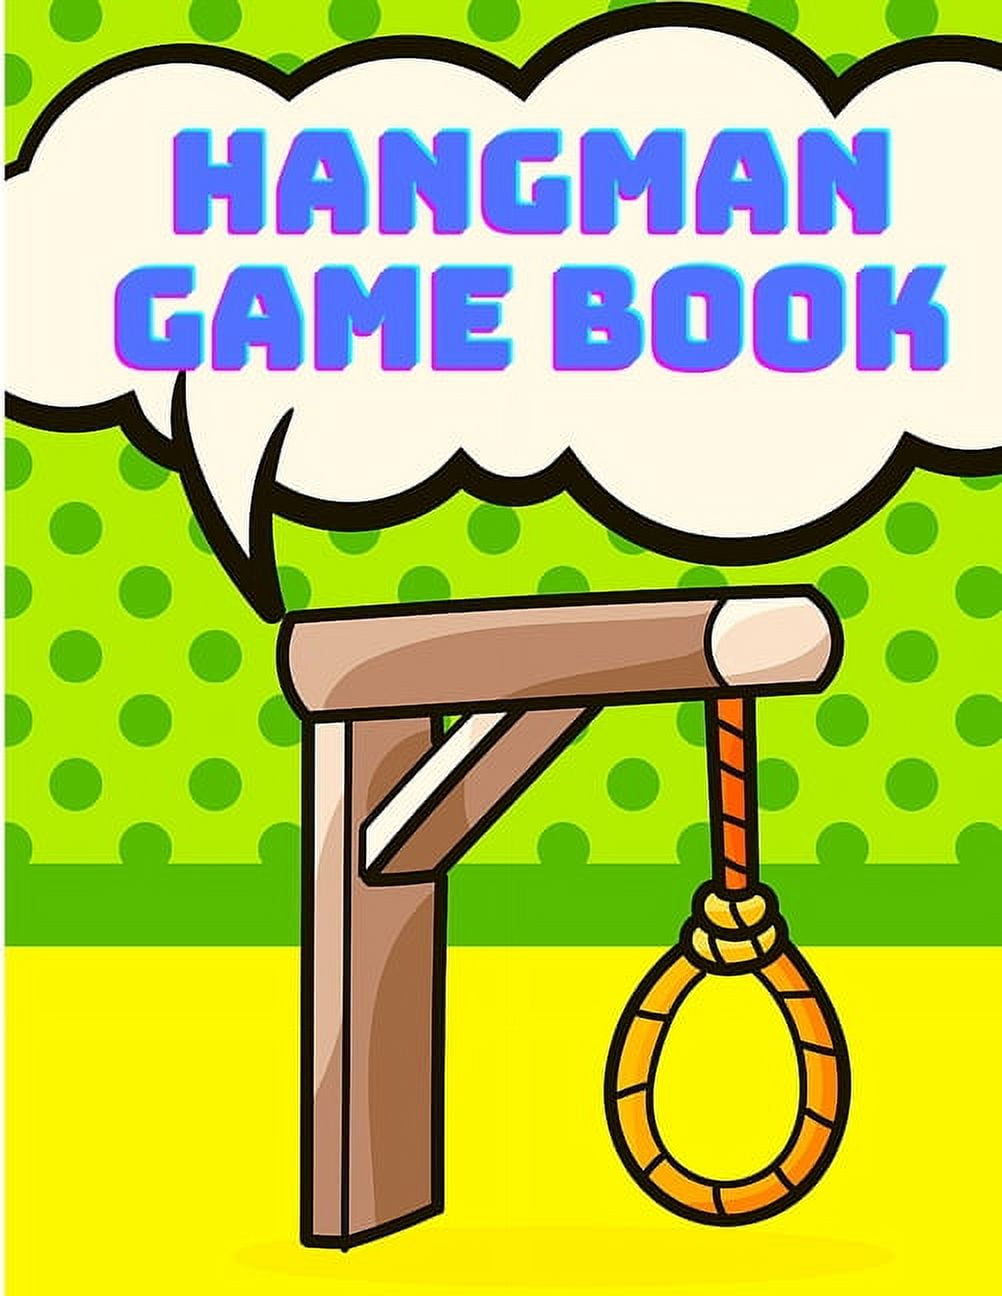 Hangman Games Let's Play Together: Puzzels --Paper & Pencil Games: 2 Player  Activity Book Hangman -- Fun Activities for Family Time - Carrigleagh Books  - 9781710918656